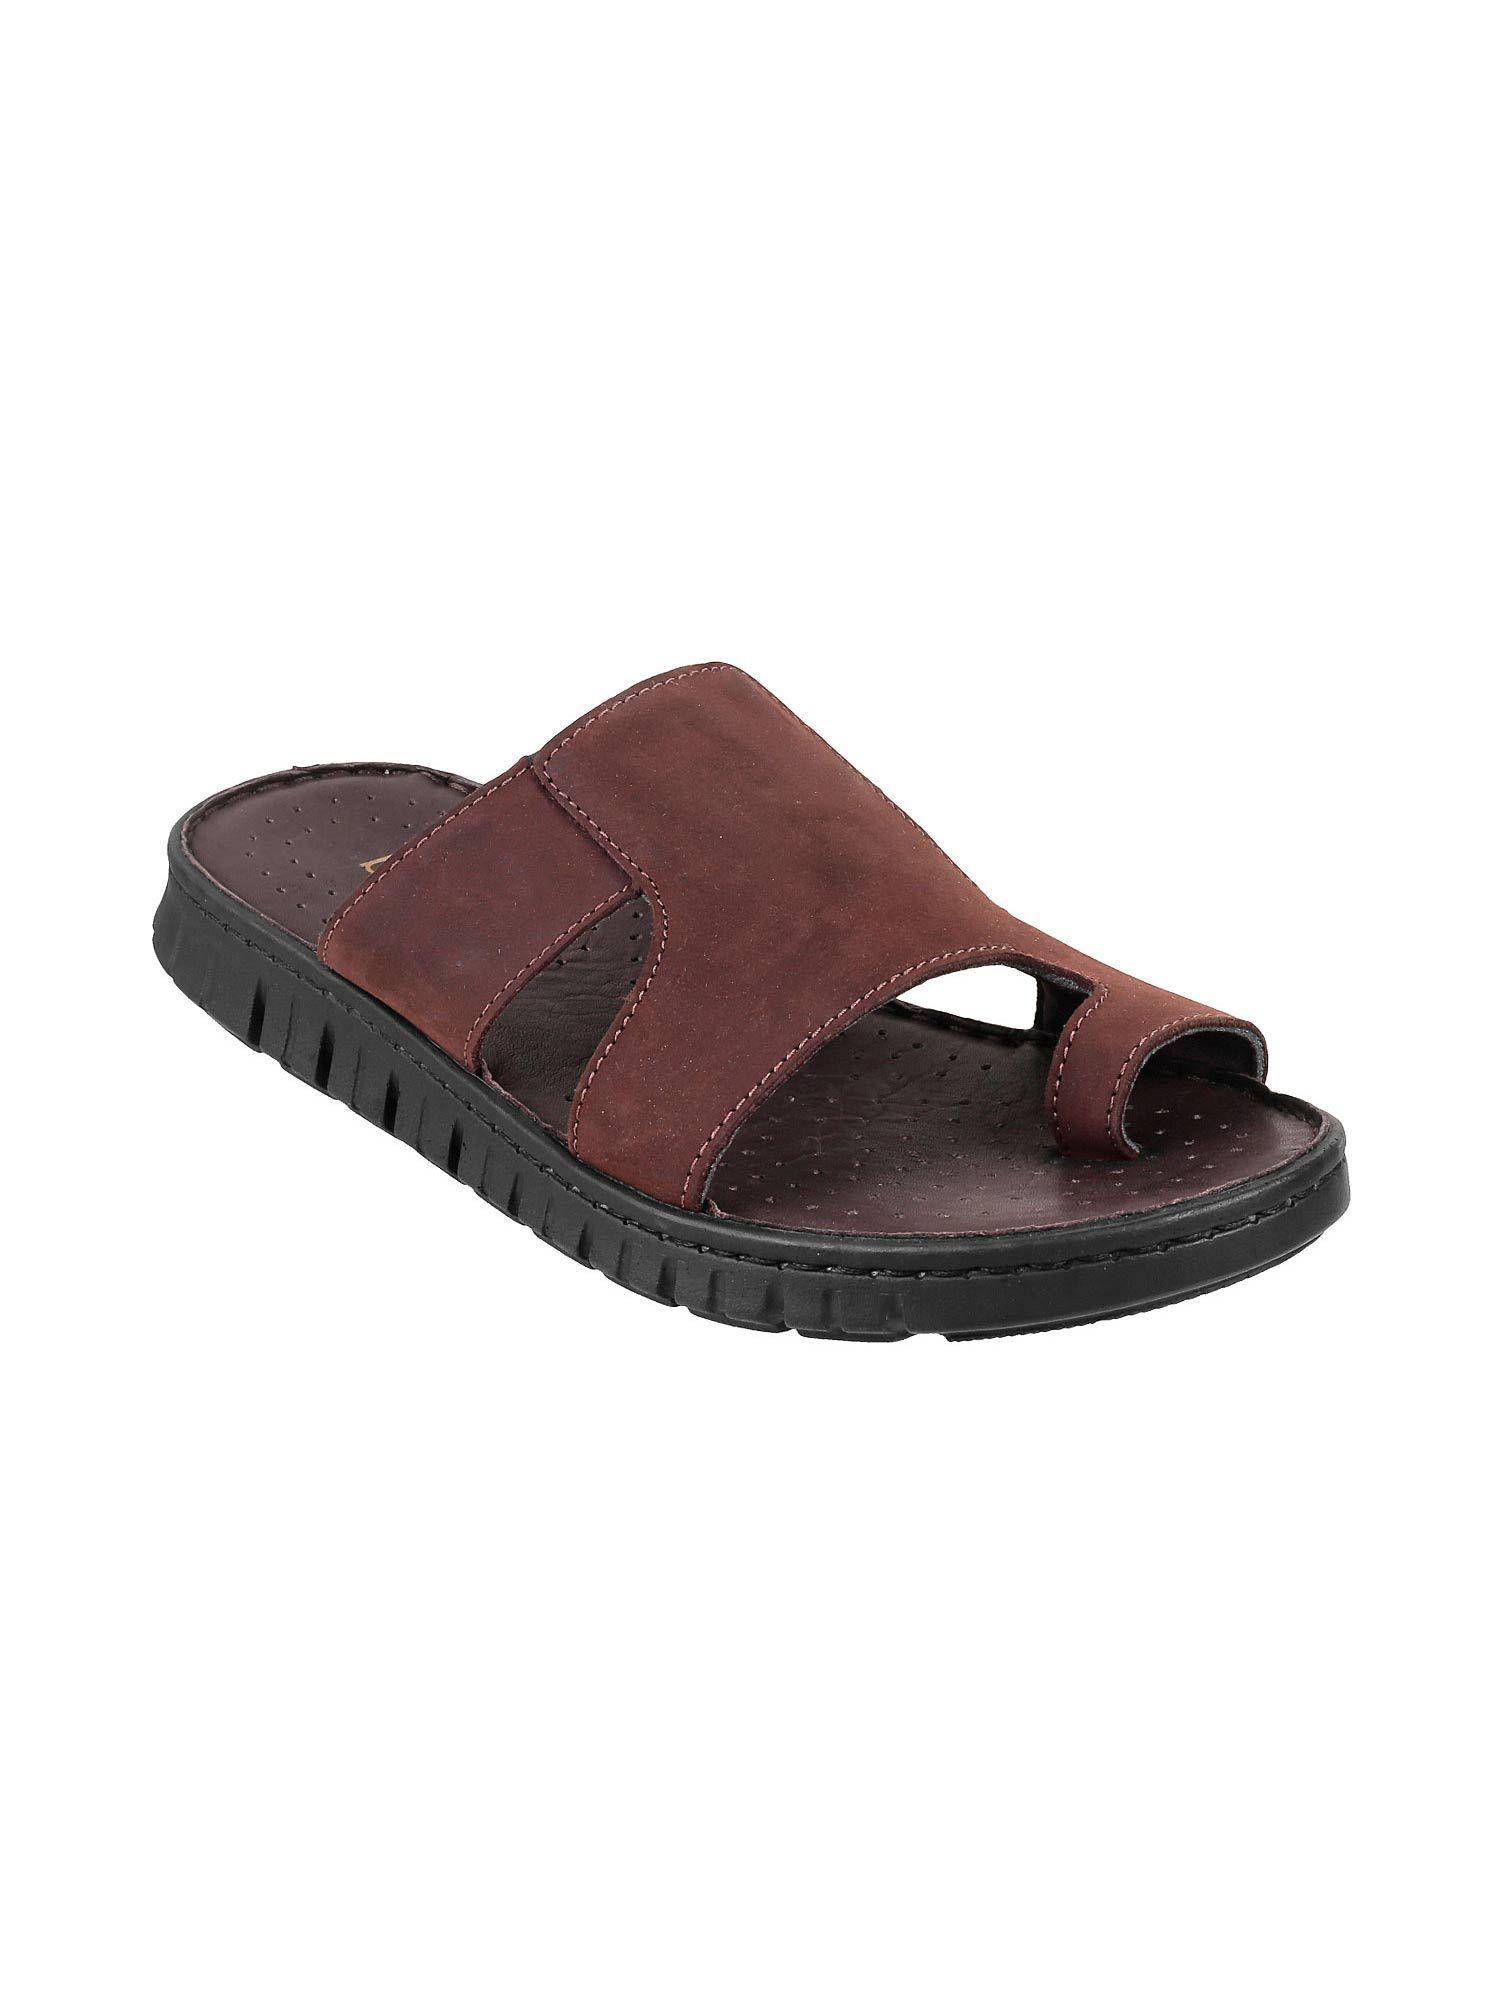 brown solid sandals